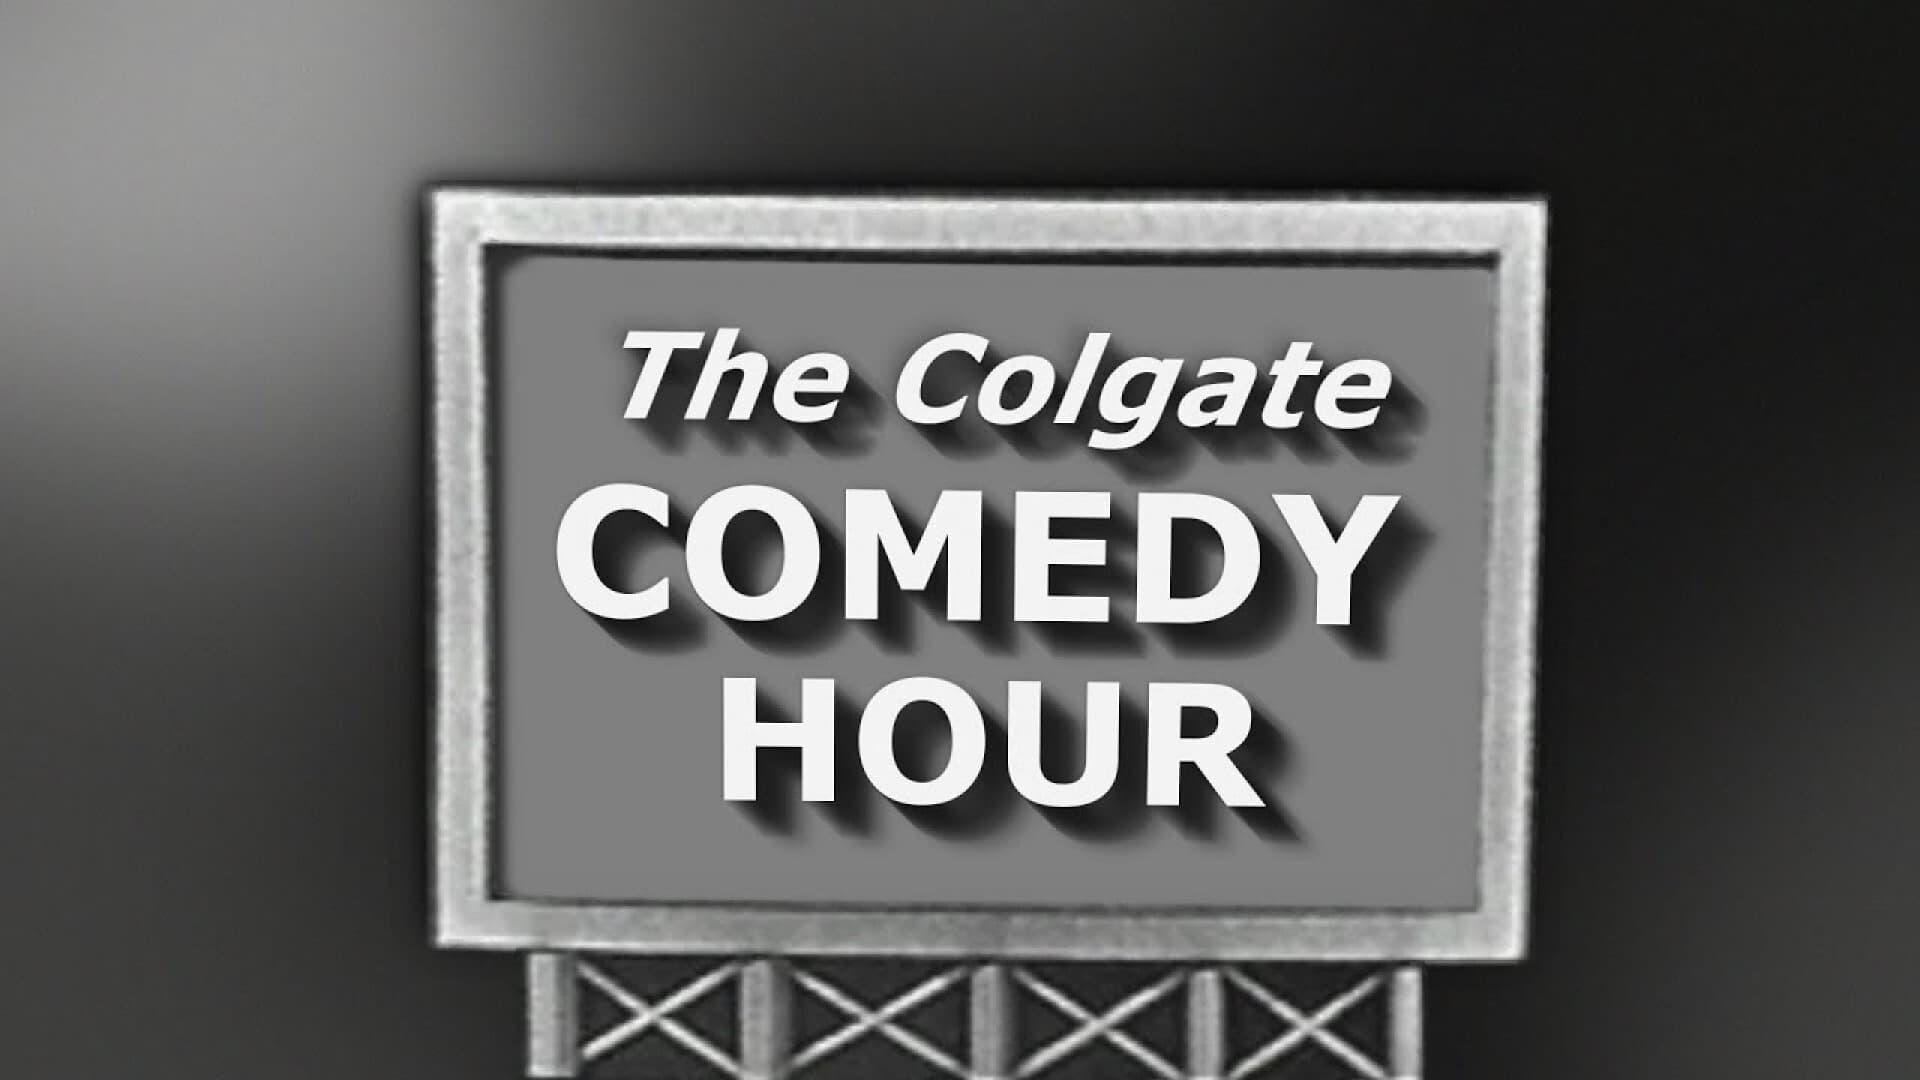 The Colgate Comedy Hour backdrop